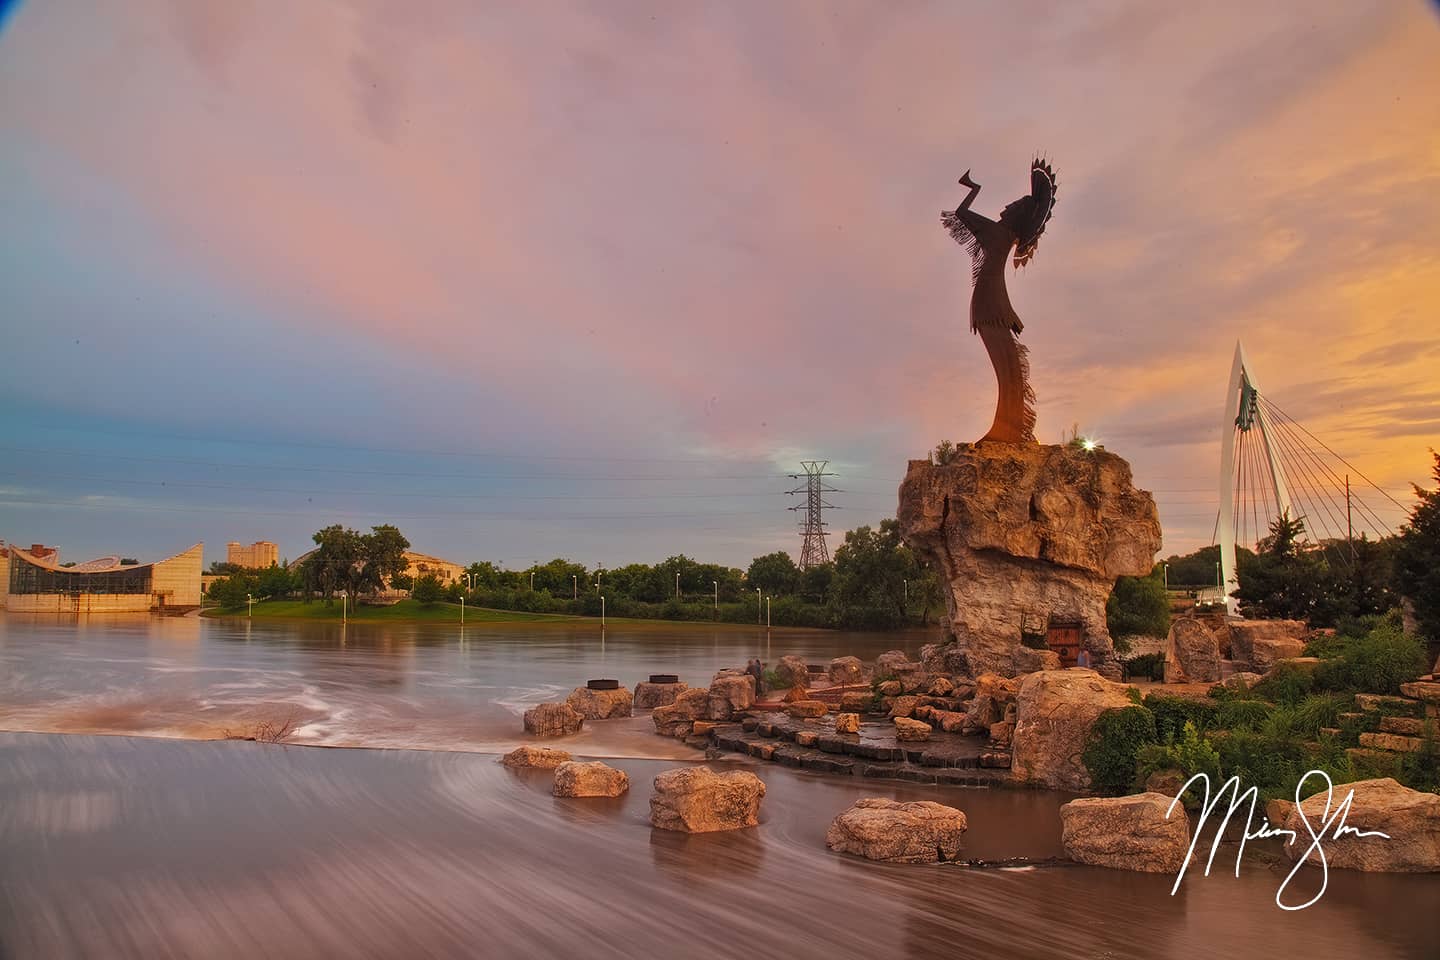 Flooded Keeper of the Plains - Keeper of the Plains, Wichita, Kansas